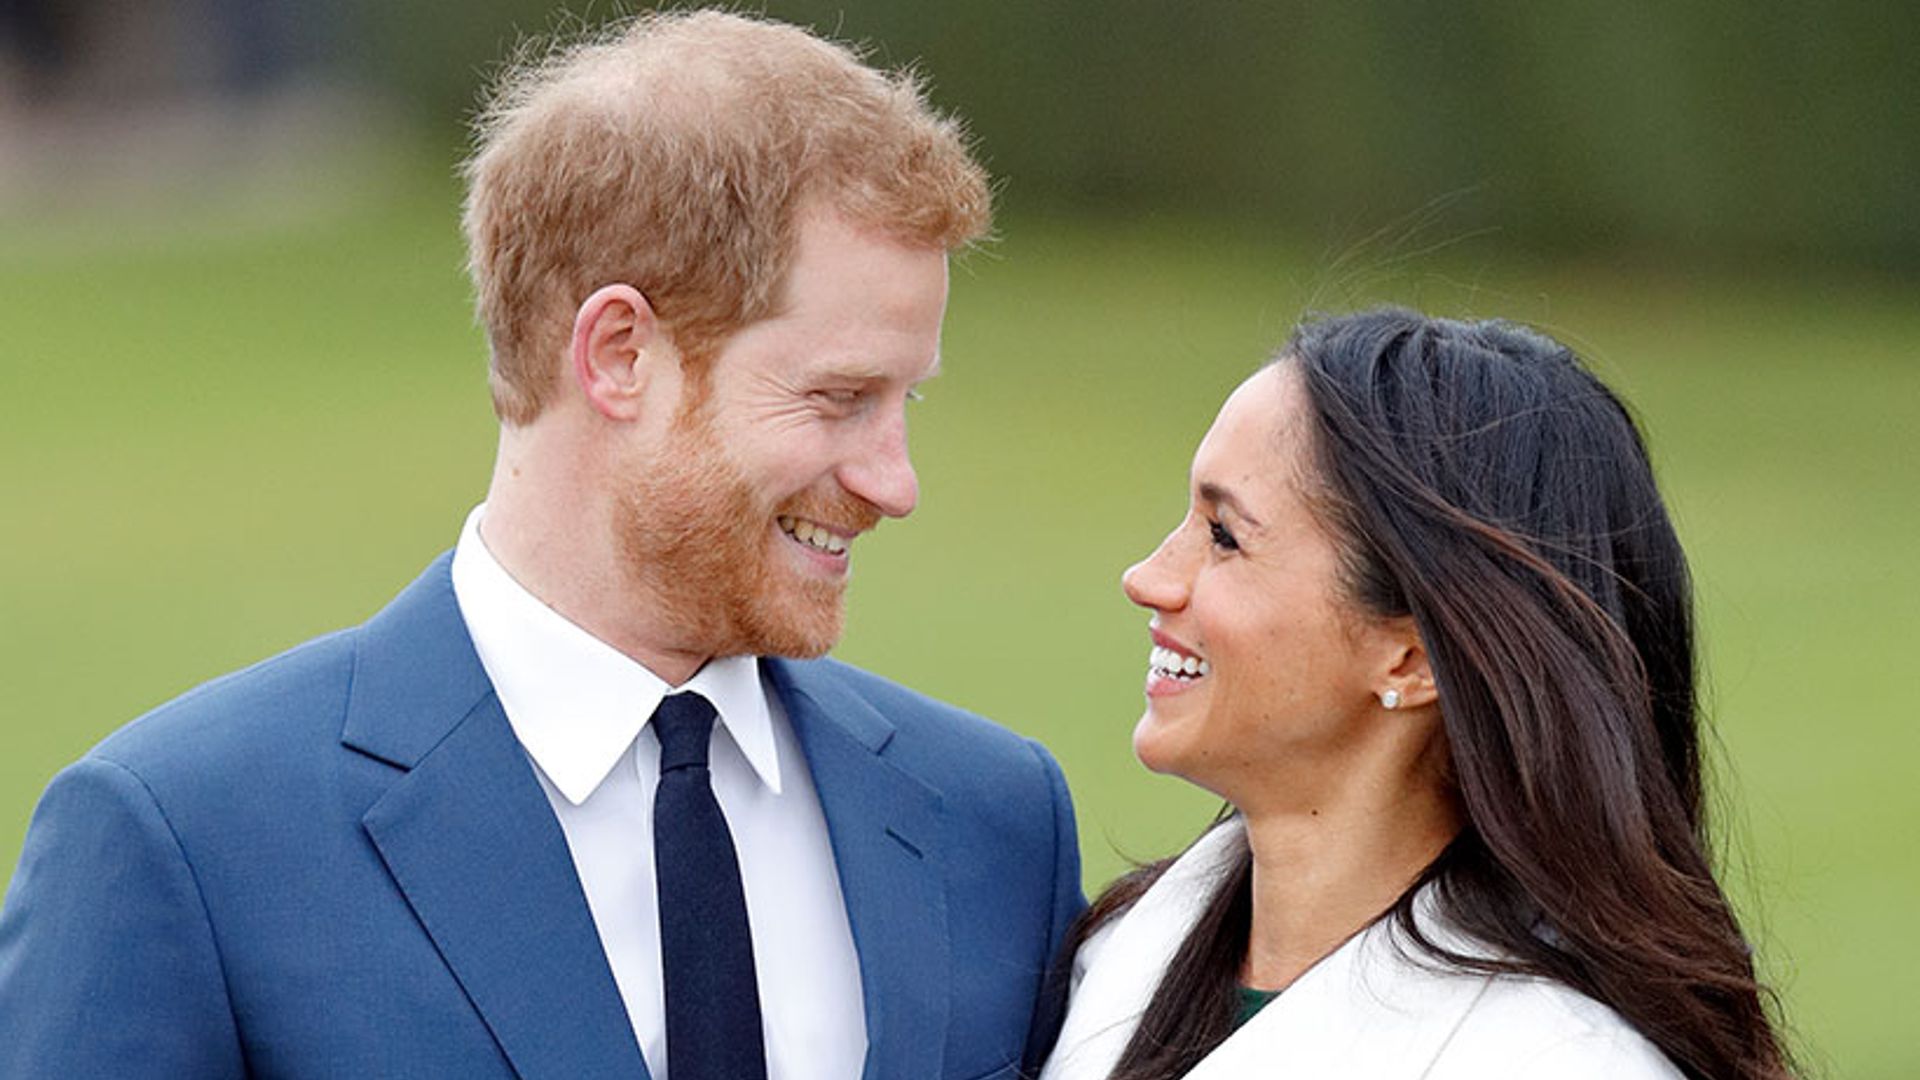 Will Prince Harry and Meghan Markle's wedding be televised?